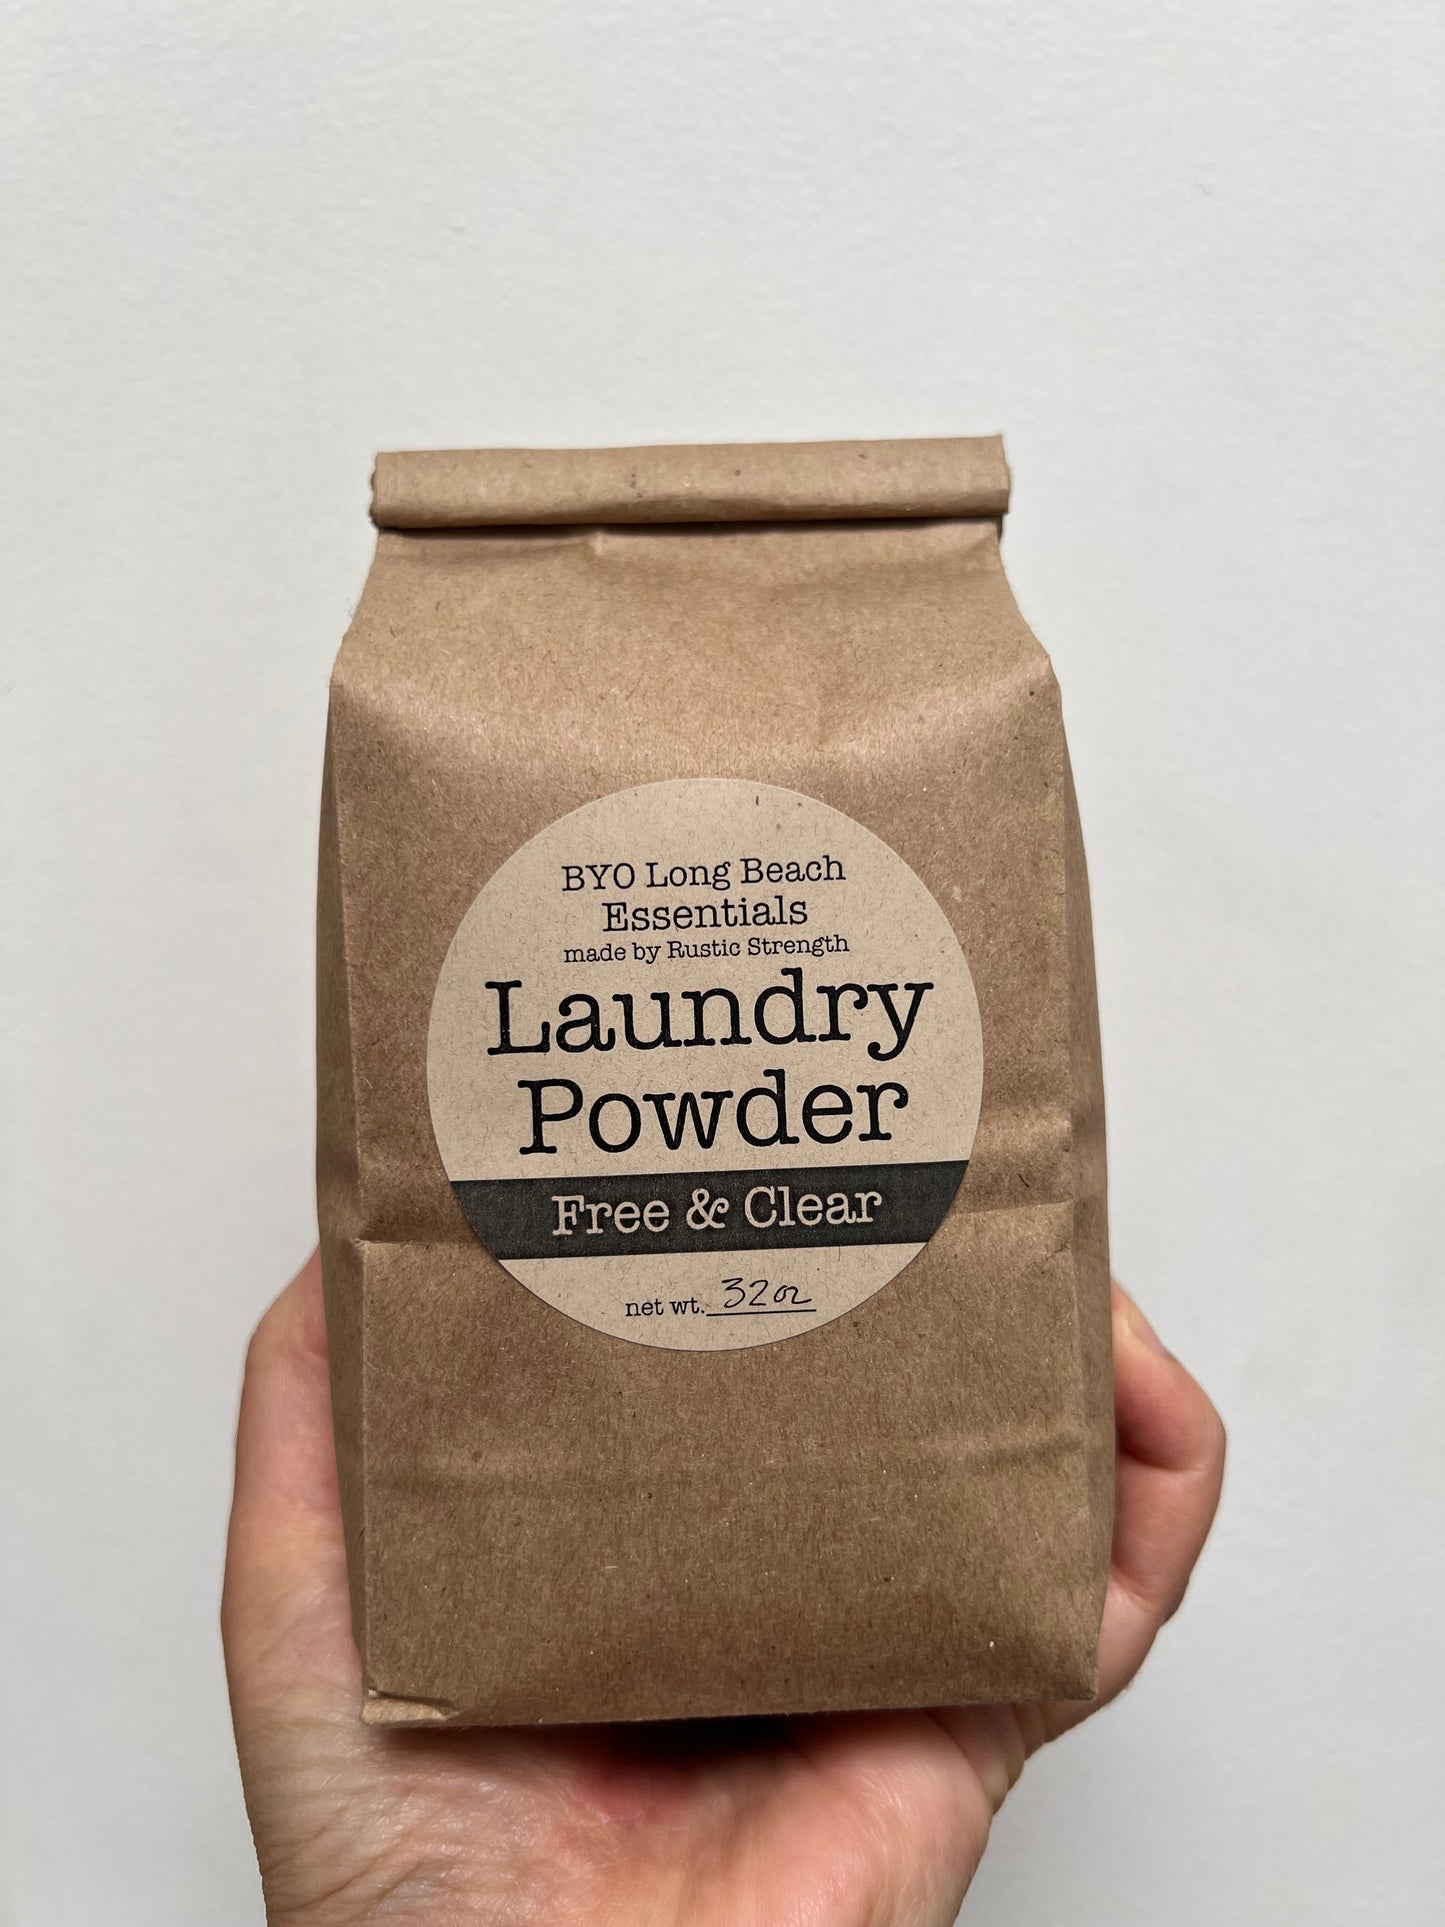 Unscented Laundry Powder by Rustic Strength